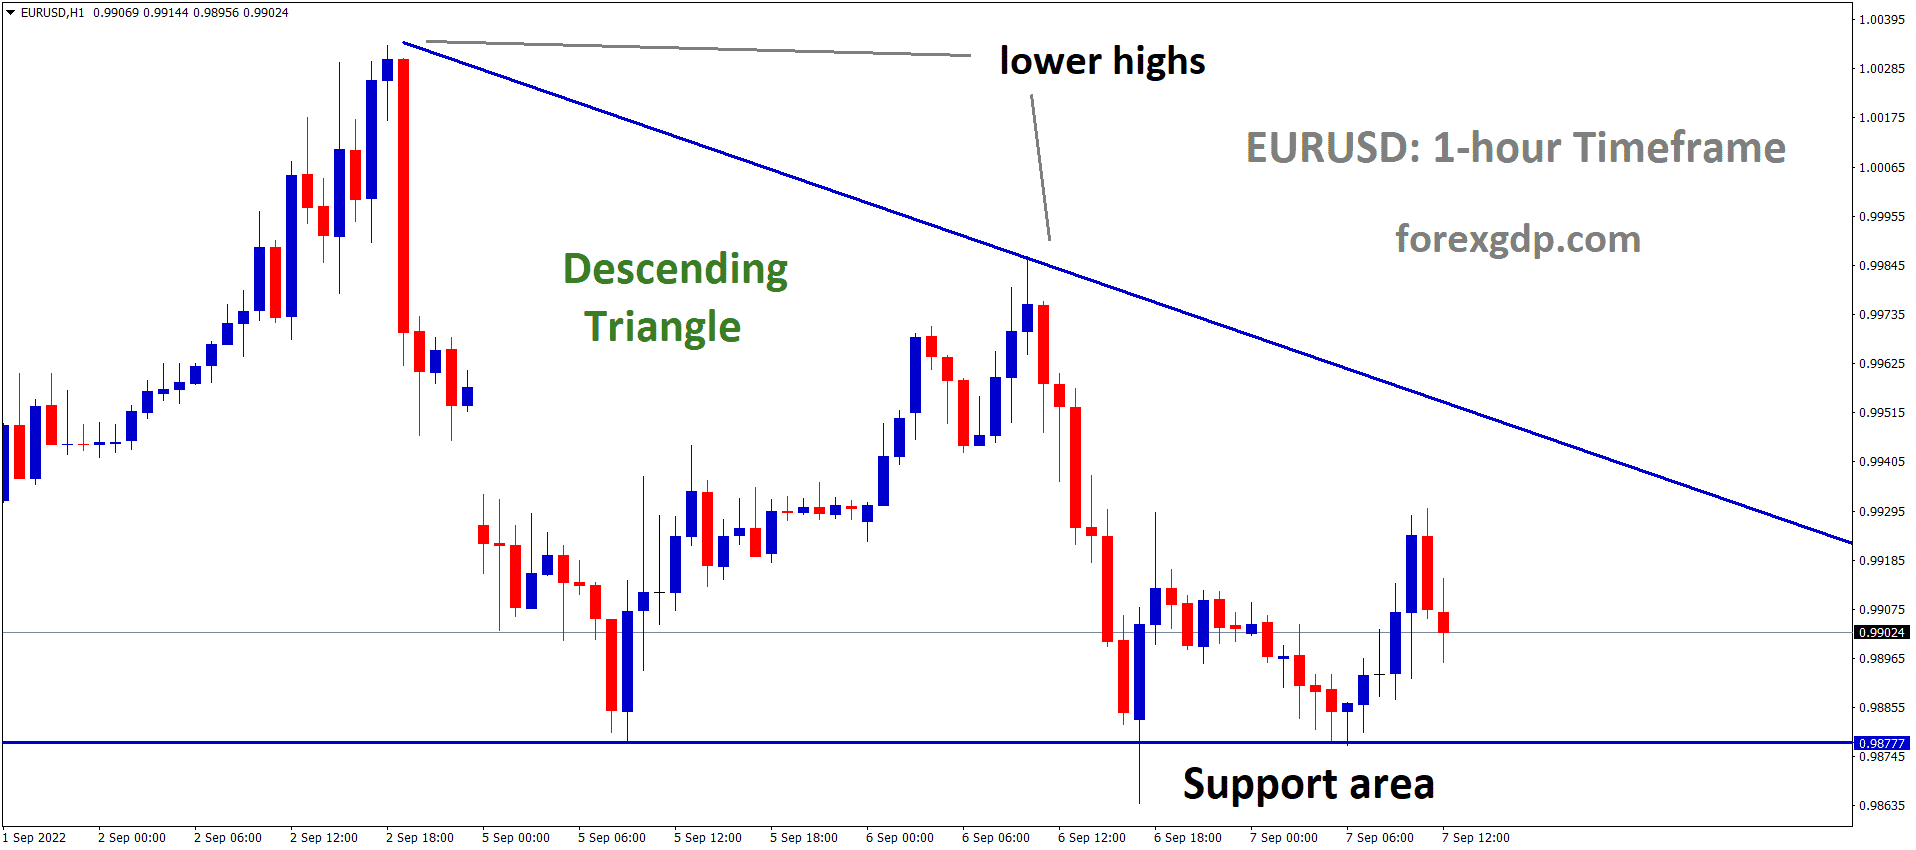 EURUSD is moving in the Descending triangle pattern and the market has rebounded from the horizontal support area of the pattern.